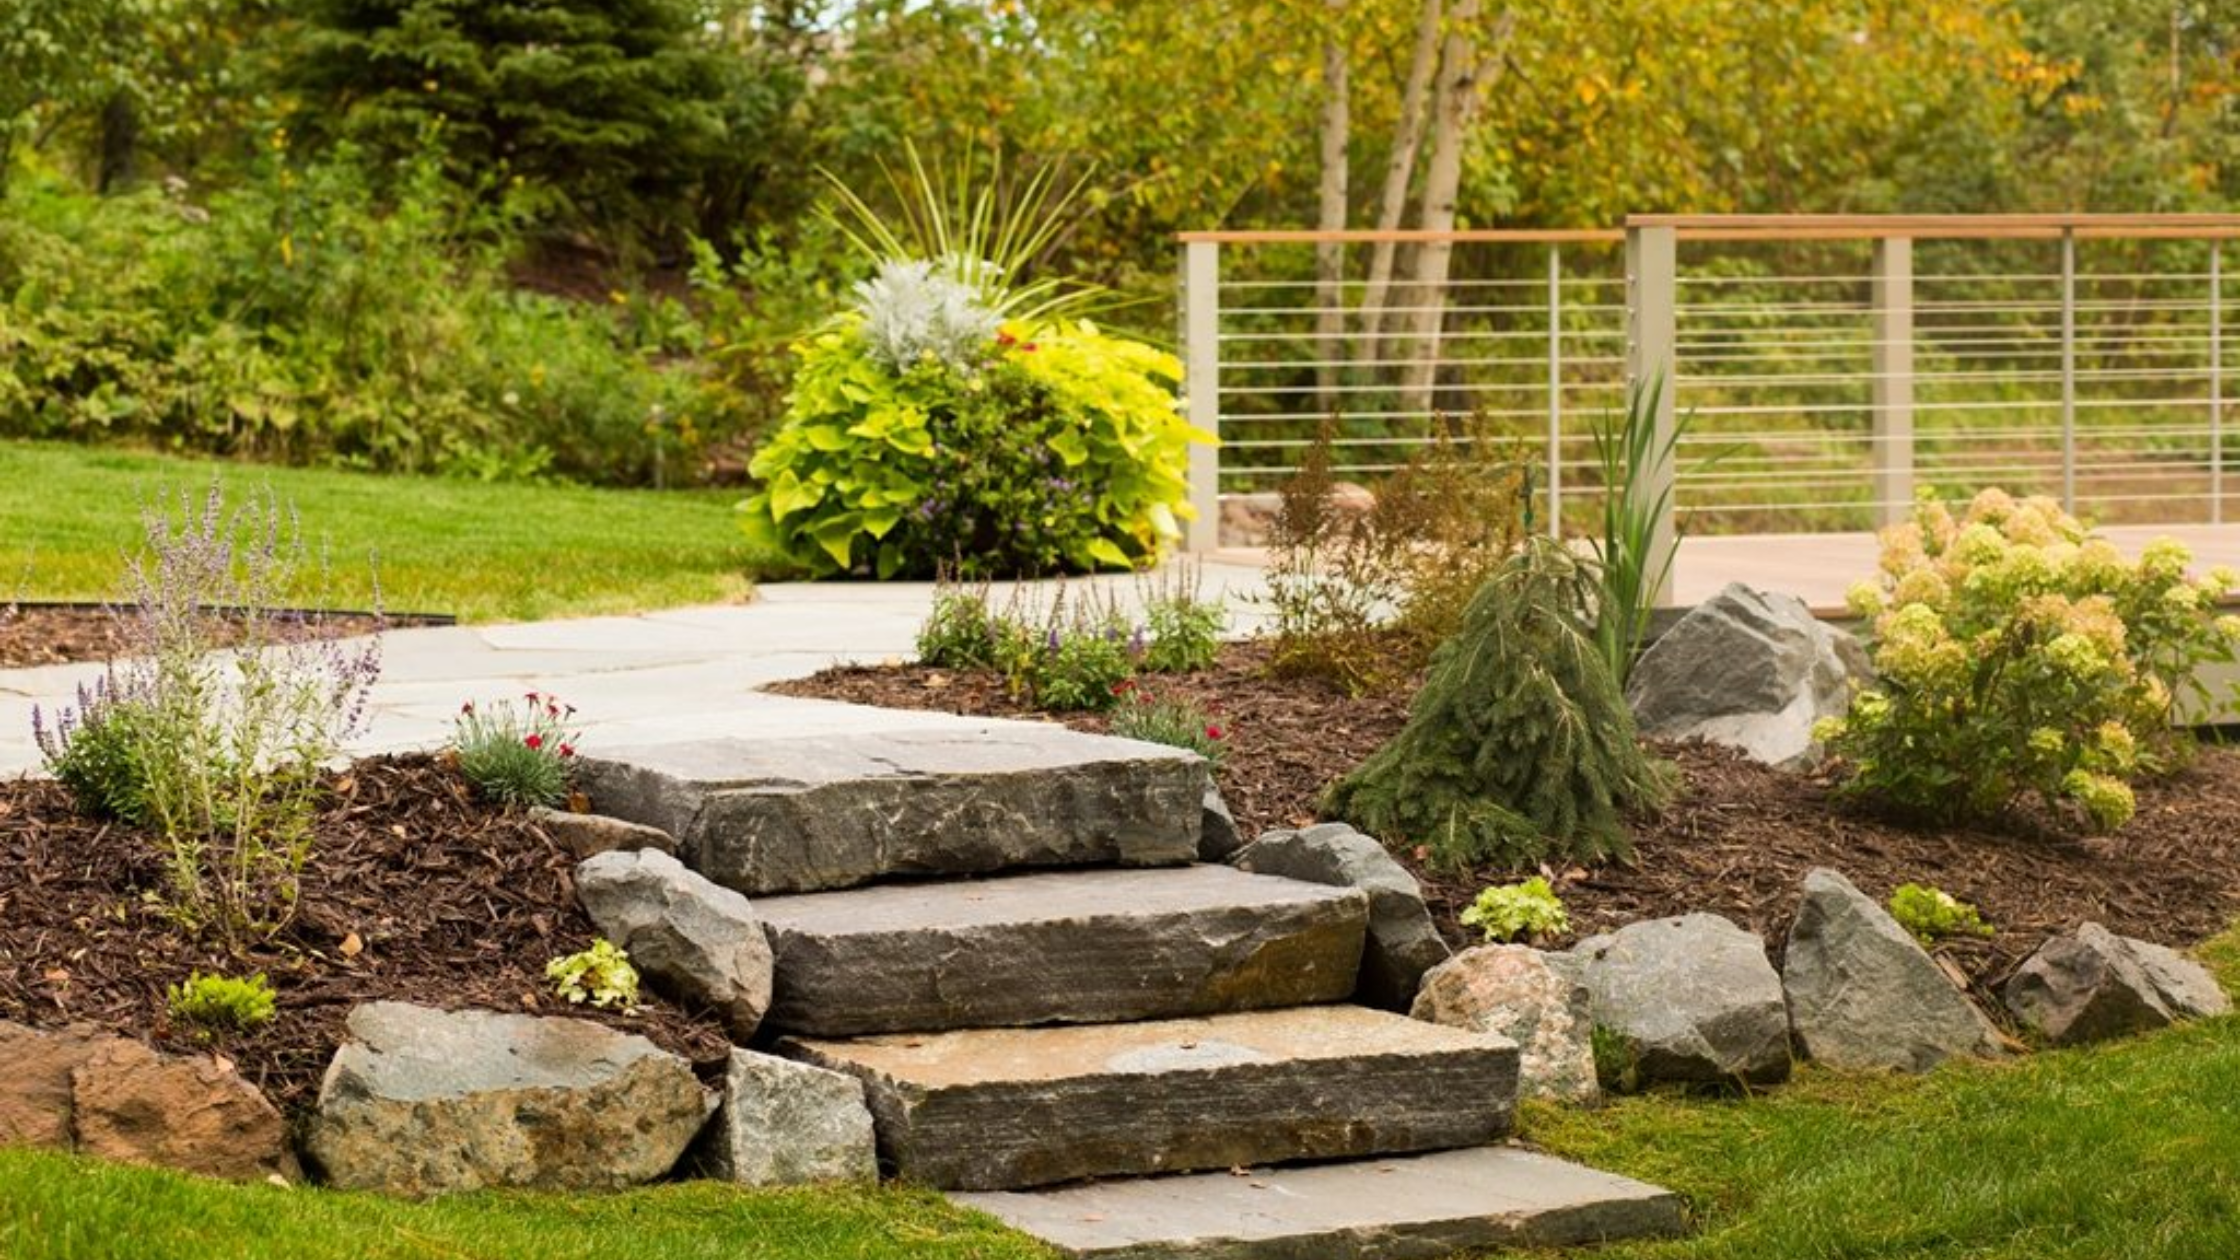 Stone steps with a garden bed on both sides